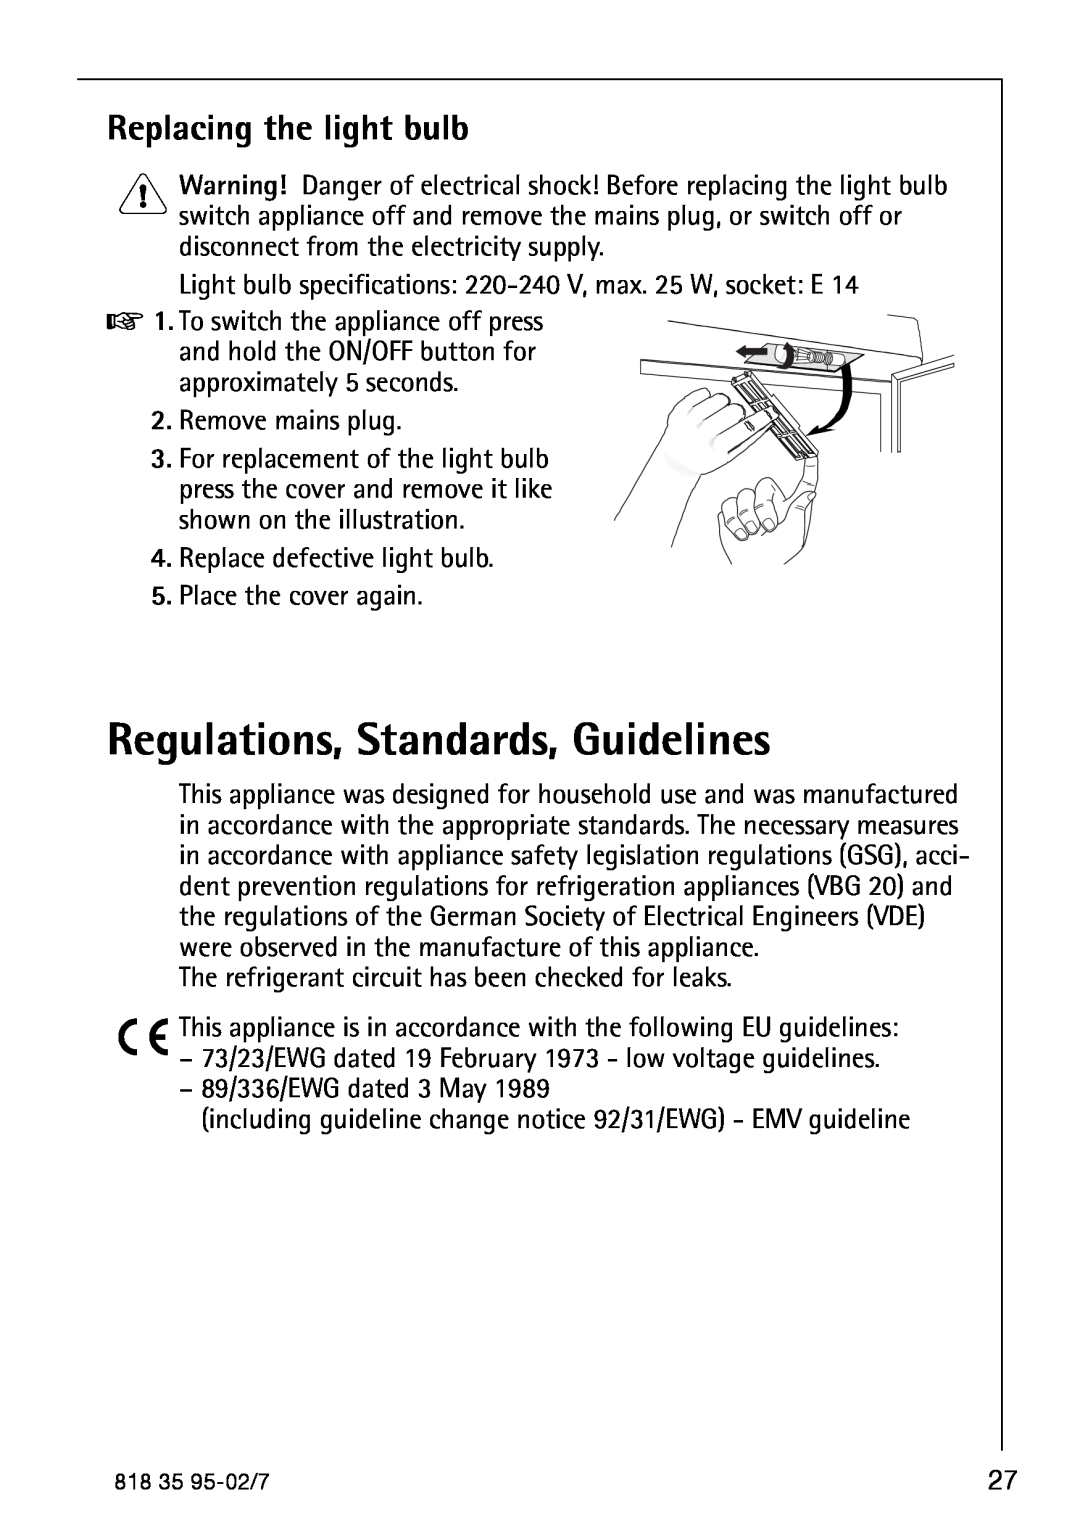 AEG S75578KG3 manual Replacing the light bulb, Regulations, Standards, Guidelines 